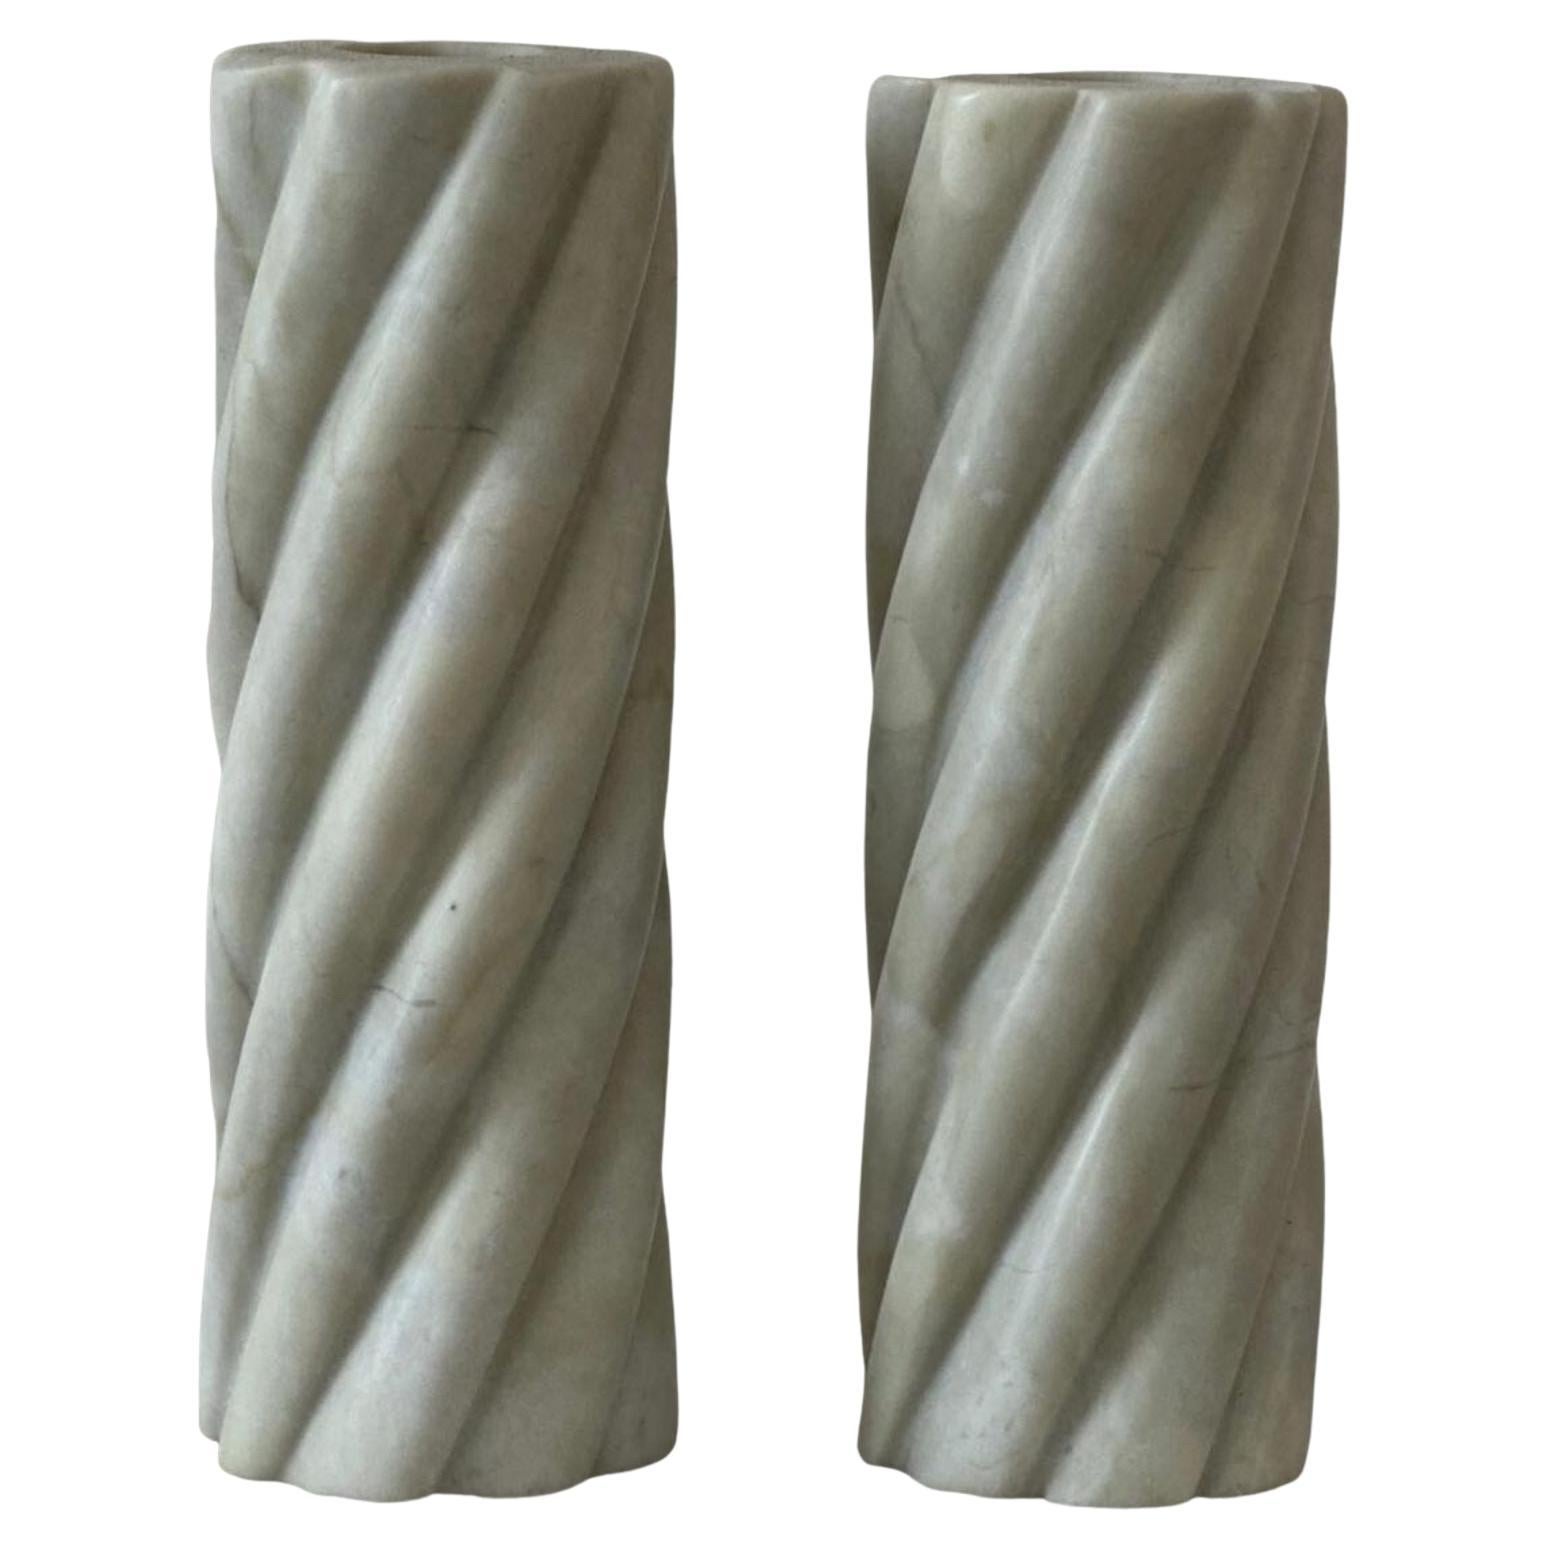 Swell Candle Set: Candle Stick Holders in Matcha Marble by Anastasio Home For Sale